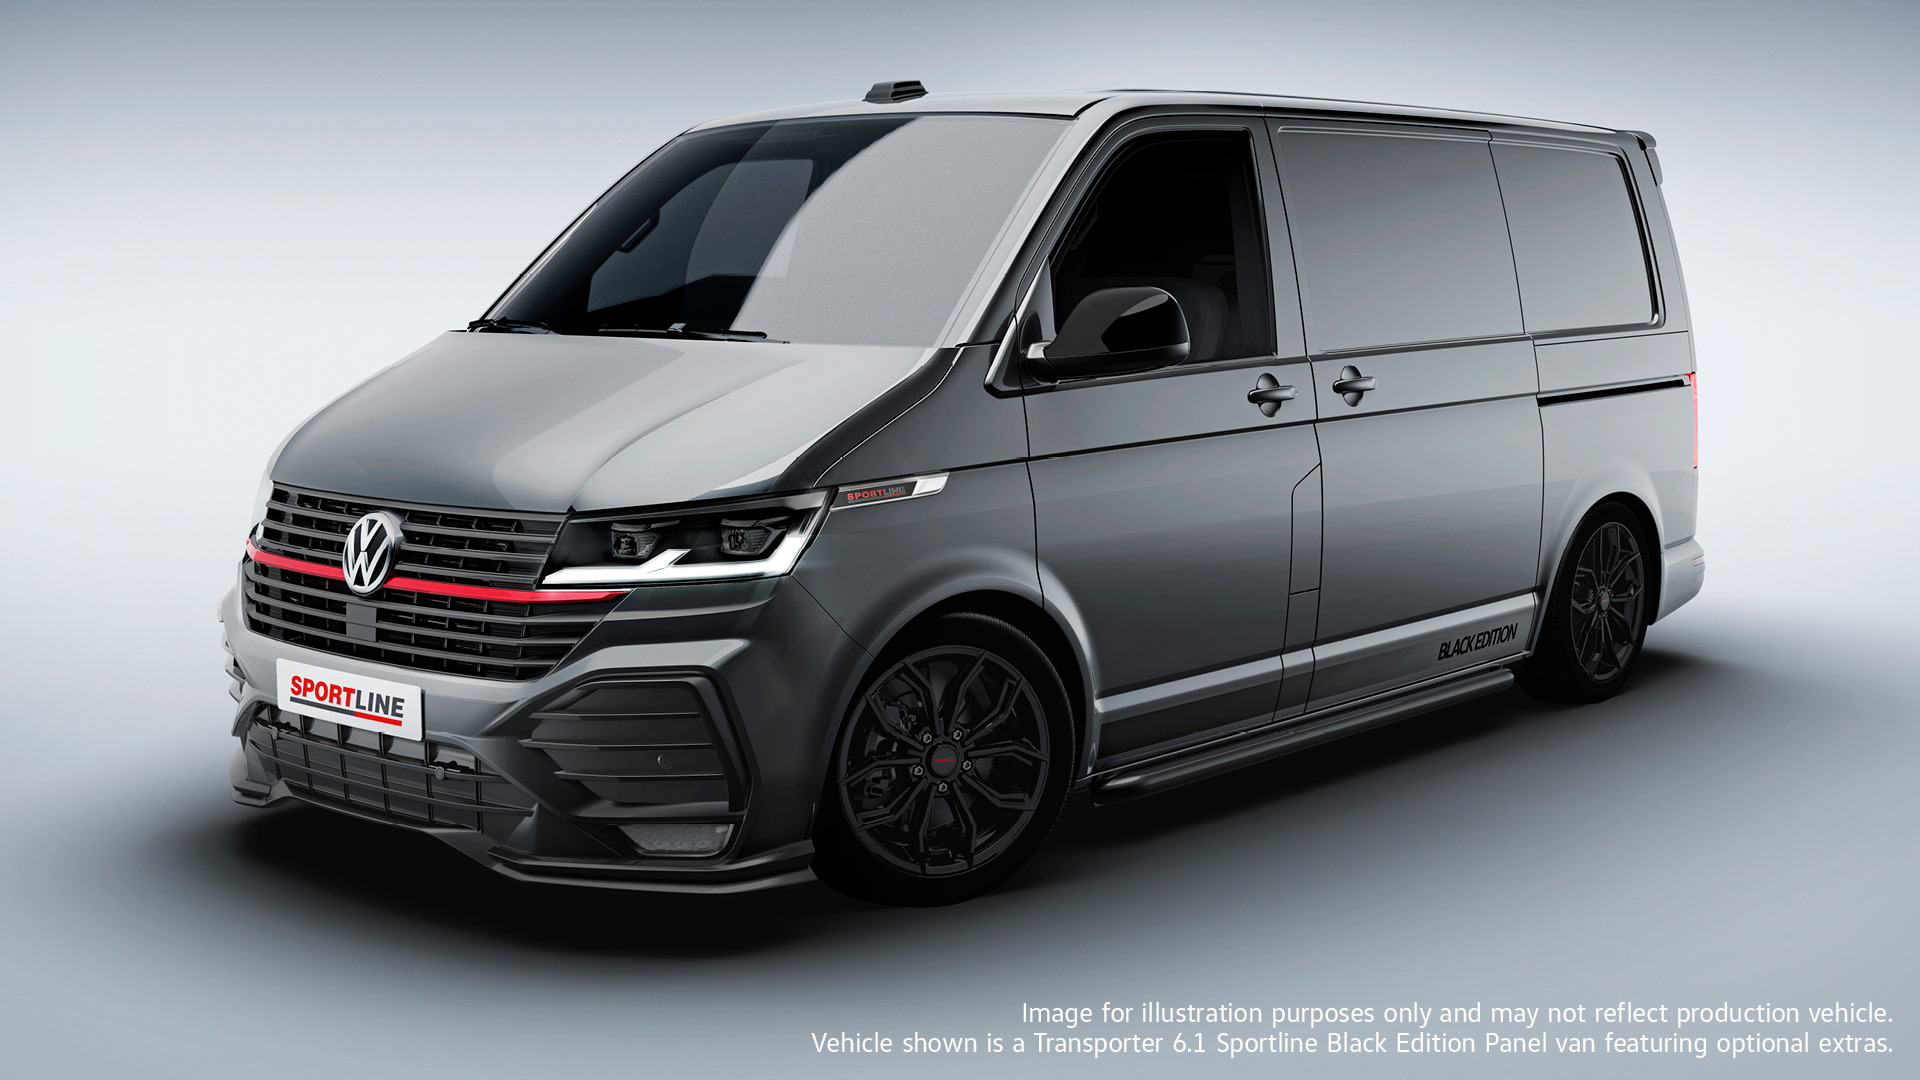 If VW made a Transporter GTI, it 